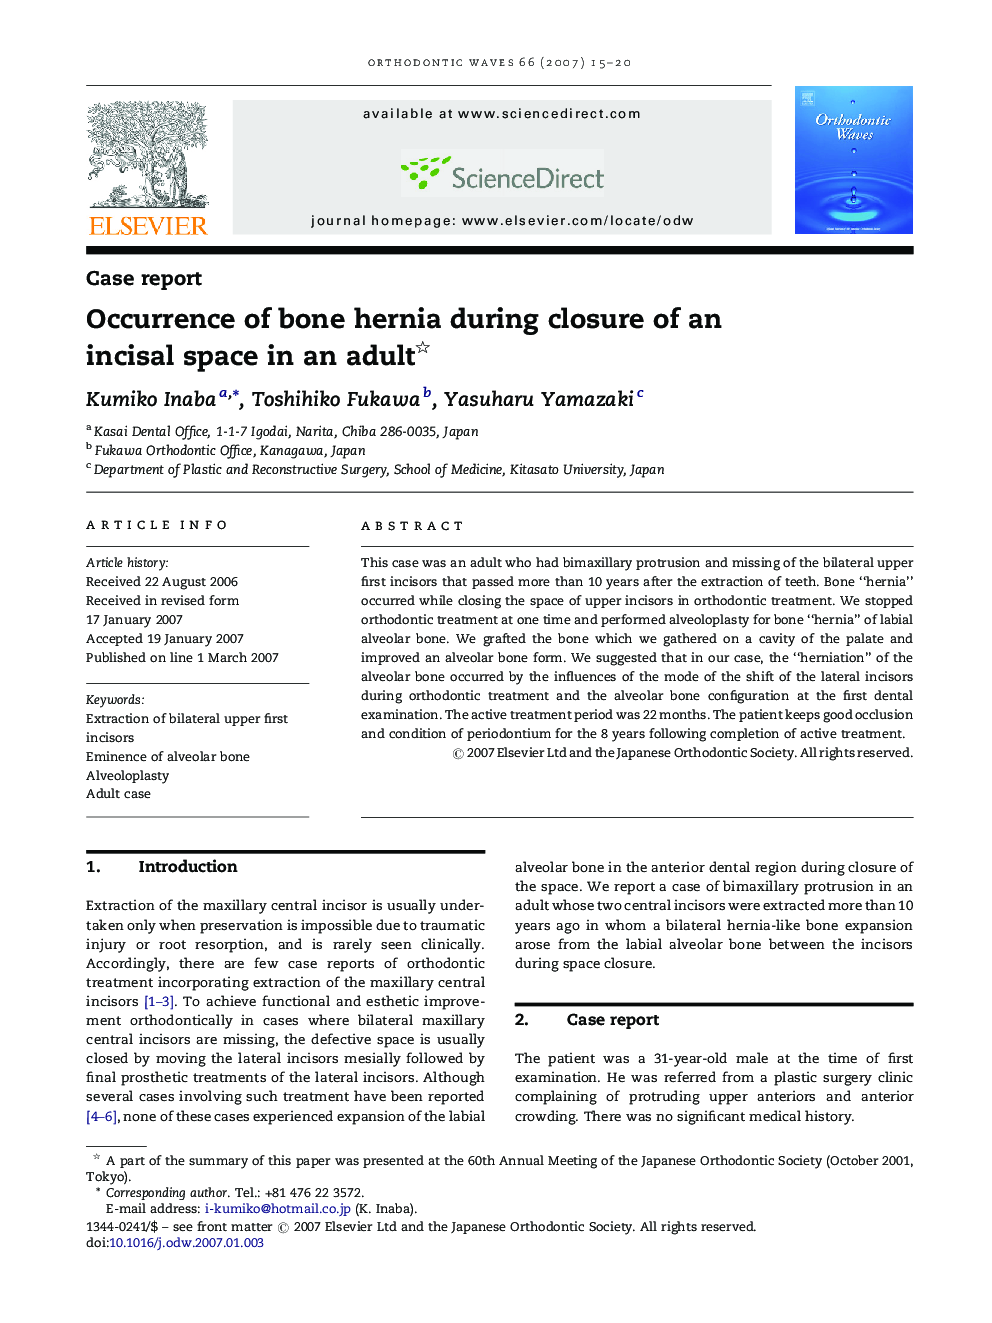 Occurrence of bone hernia during closure of an incisal space in an adult 